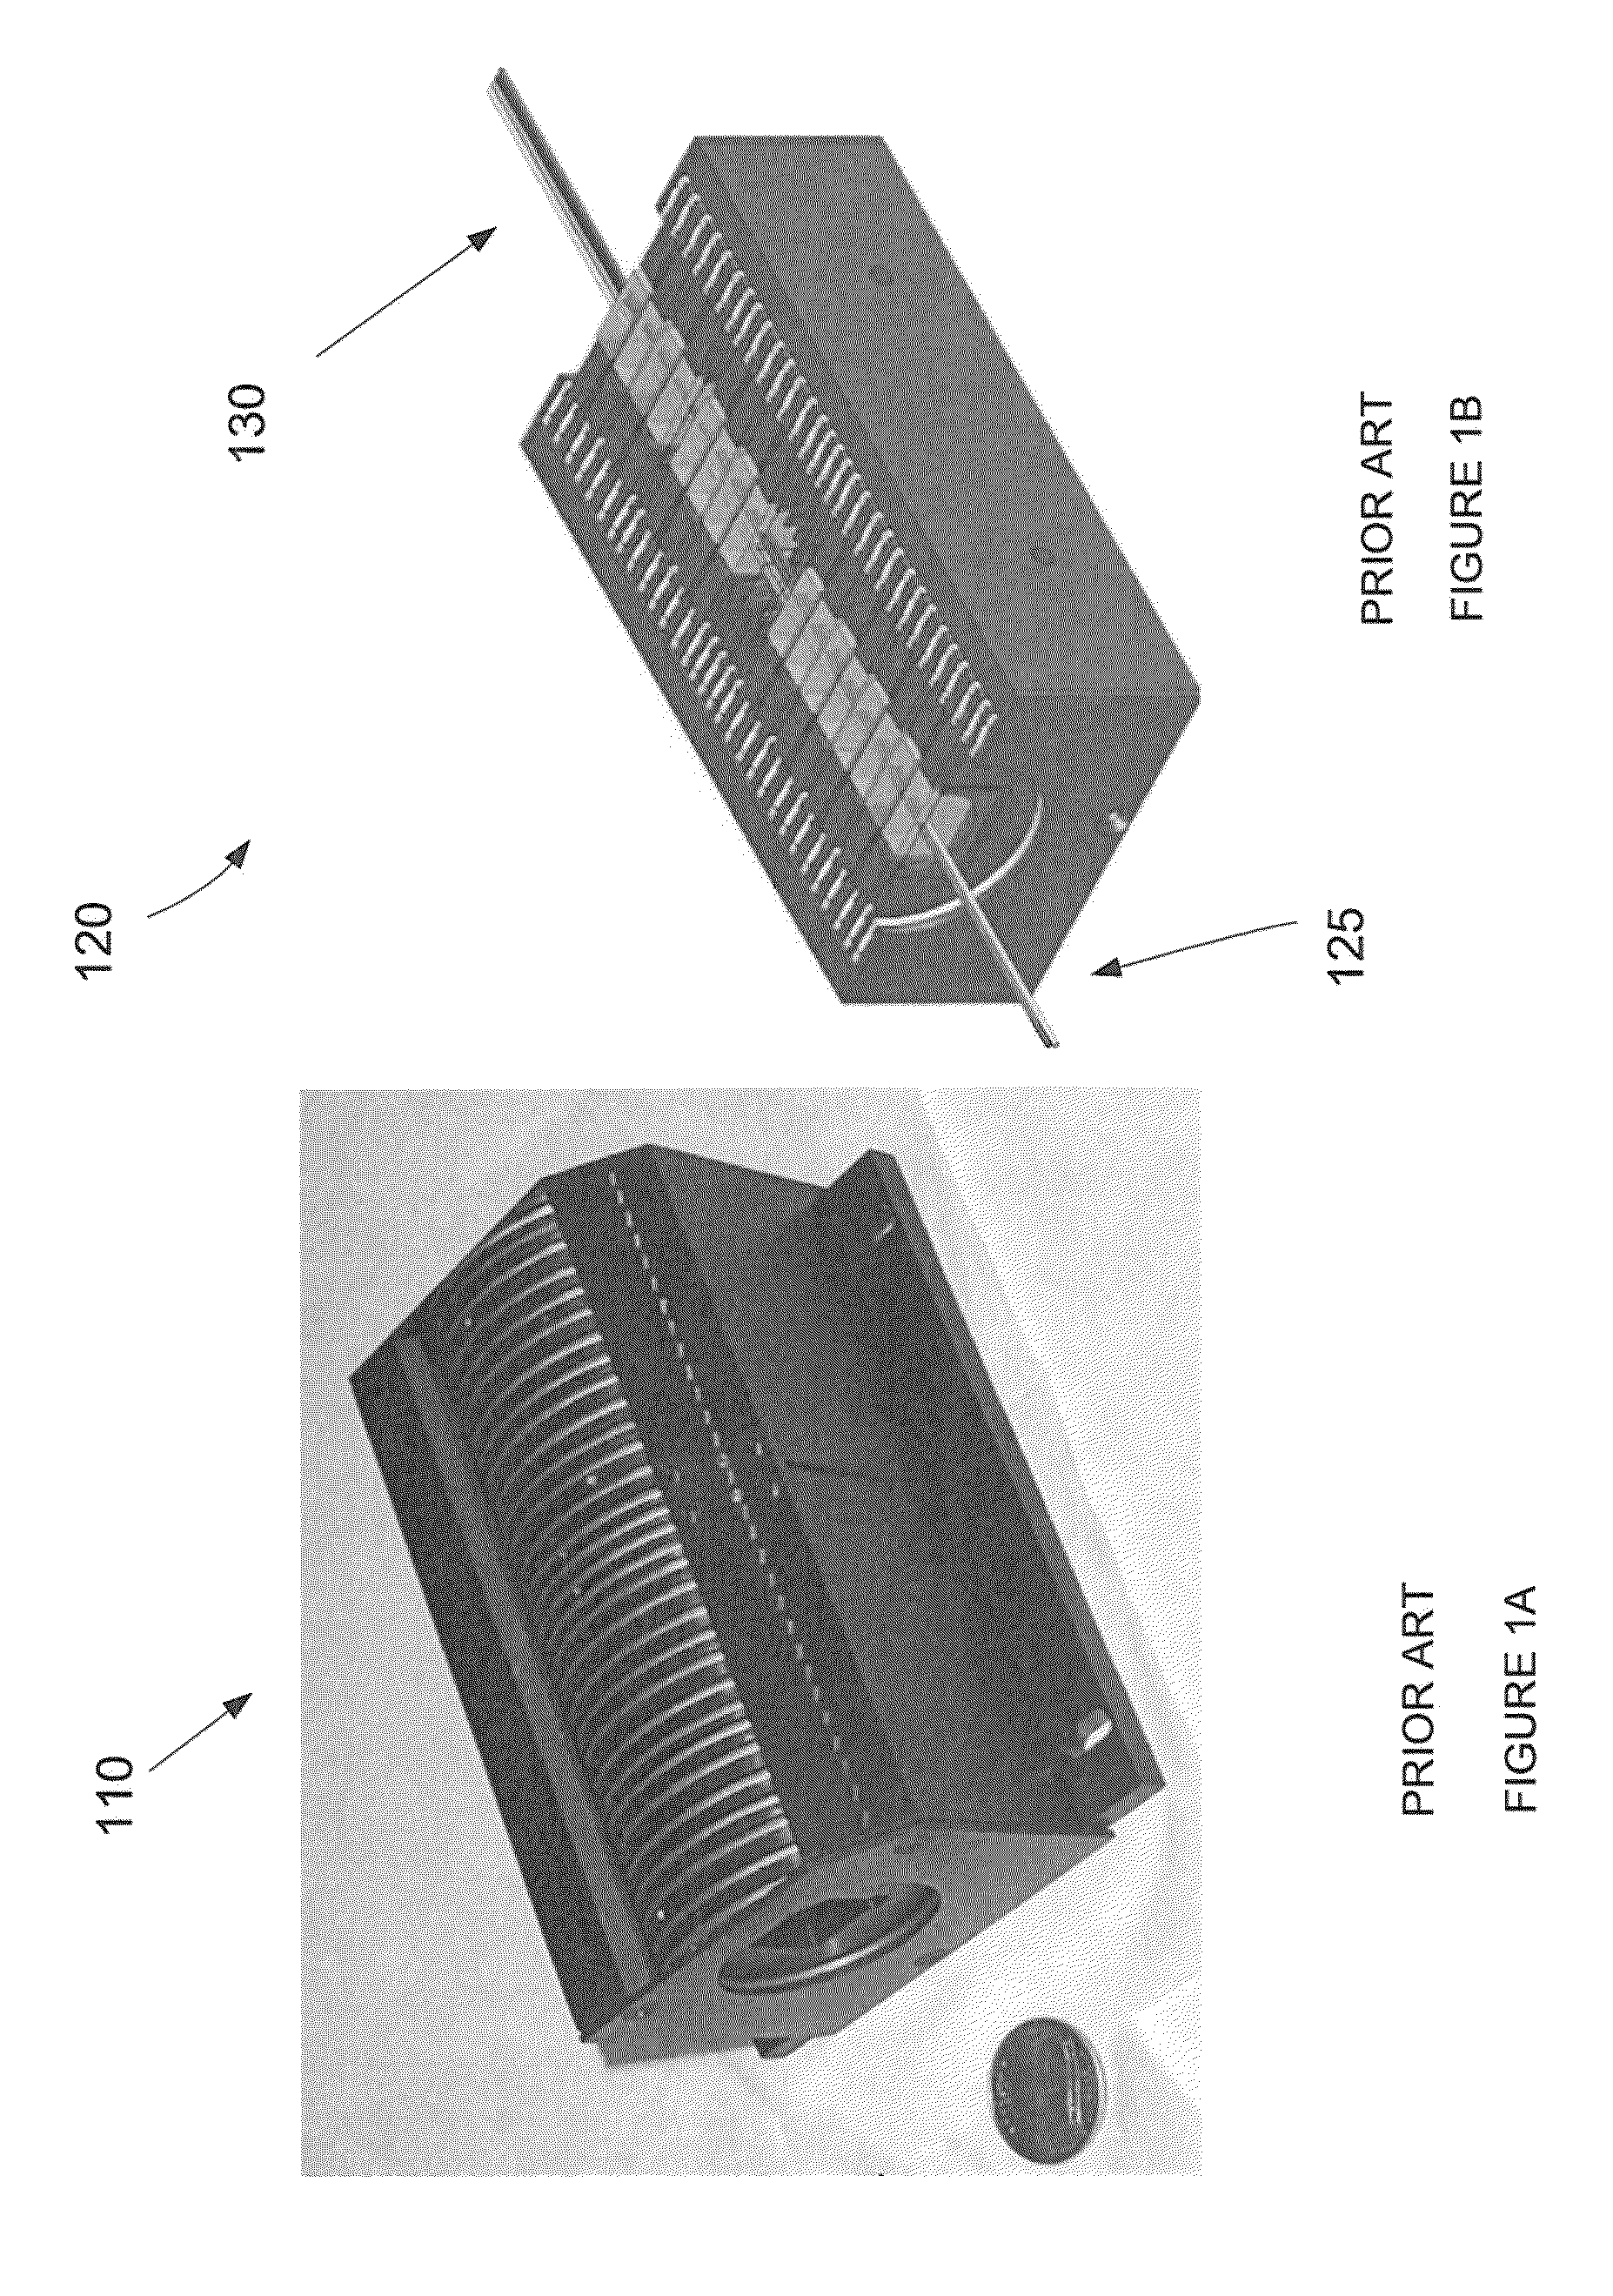 System and method for a self-referencing interferometer